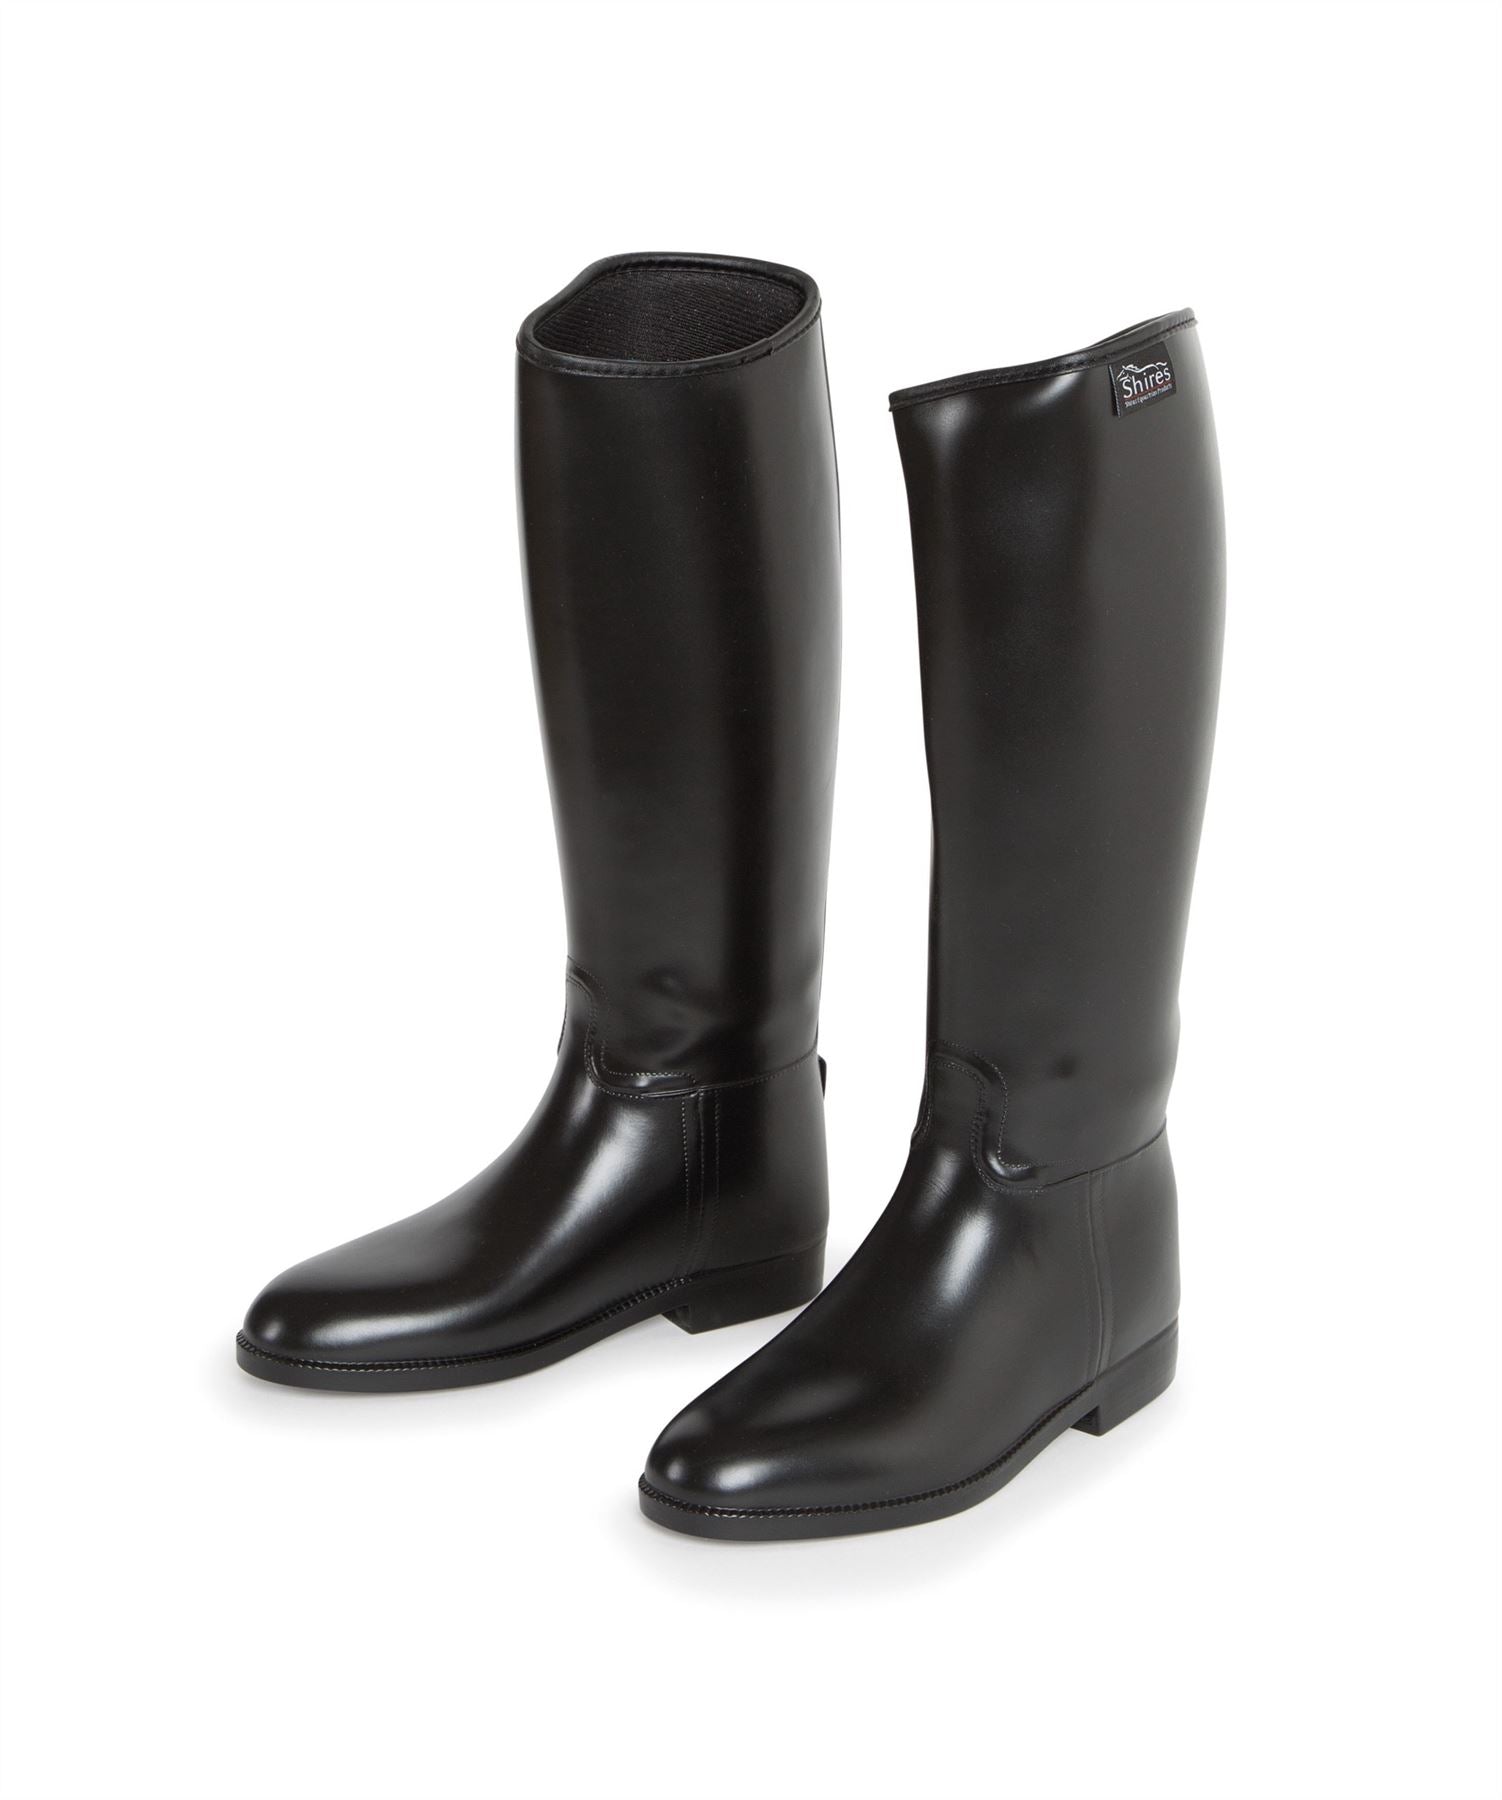 Shires Long Waterproof Riding Boots - Mens - Just Horse Riders